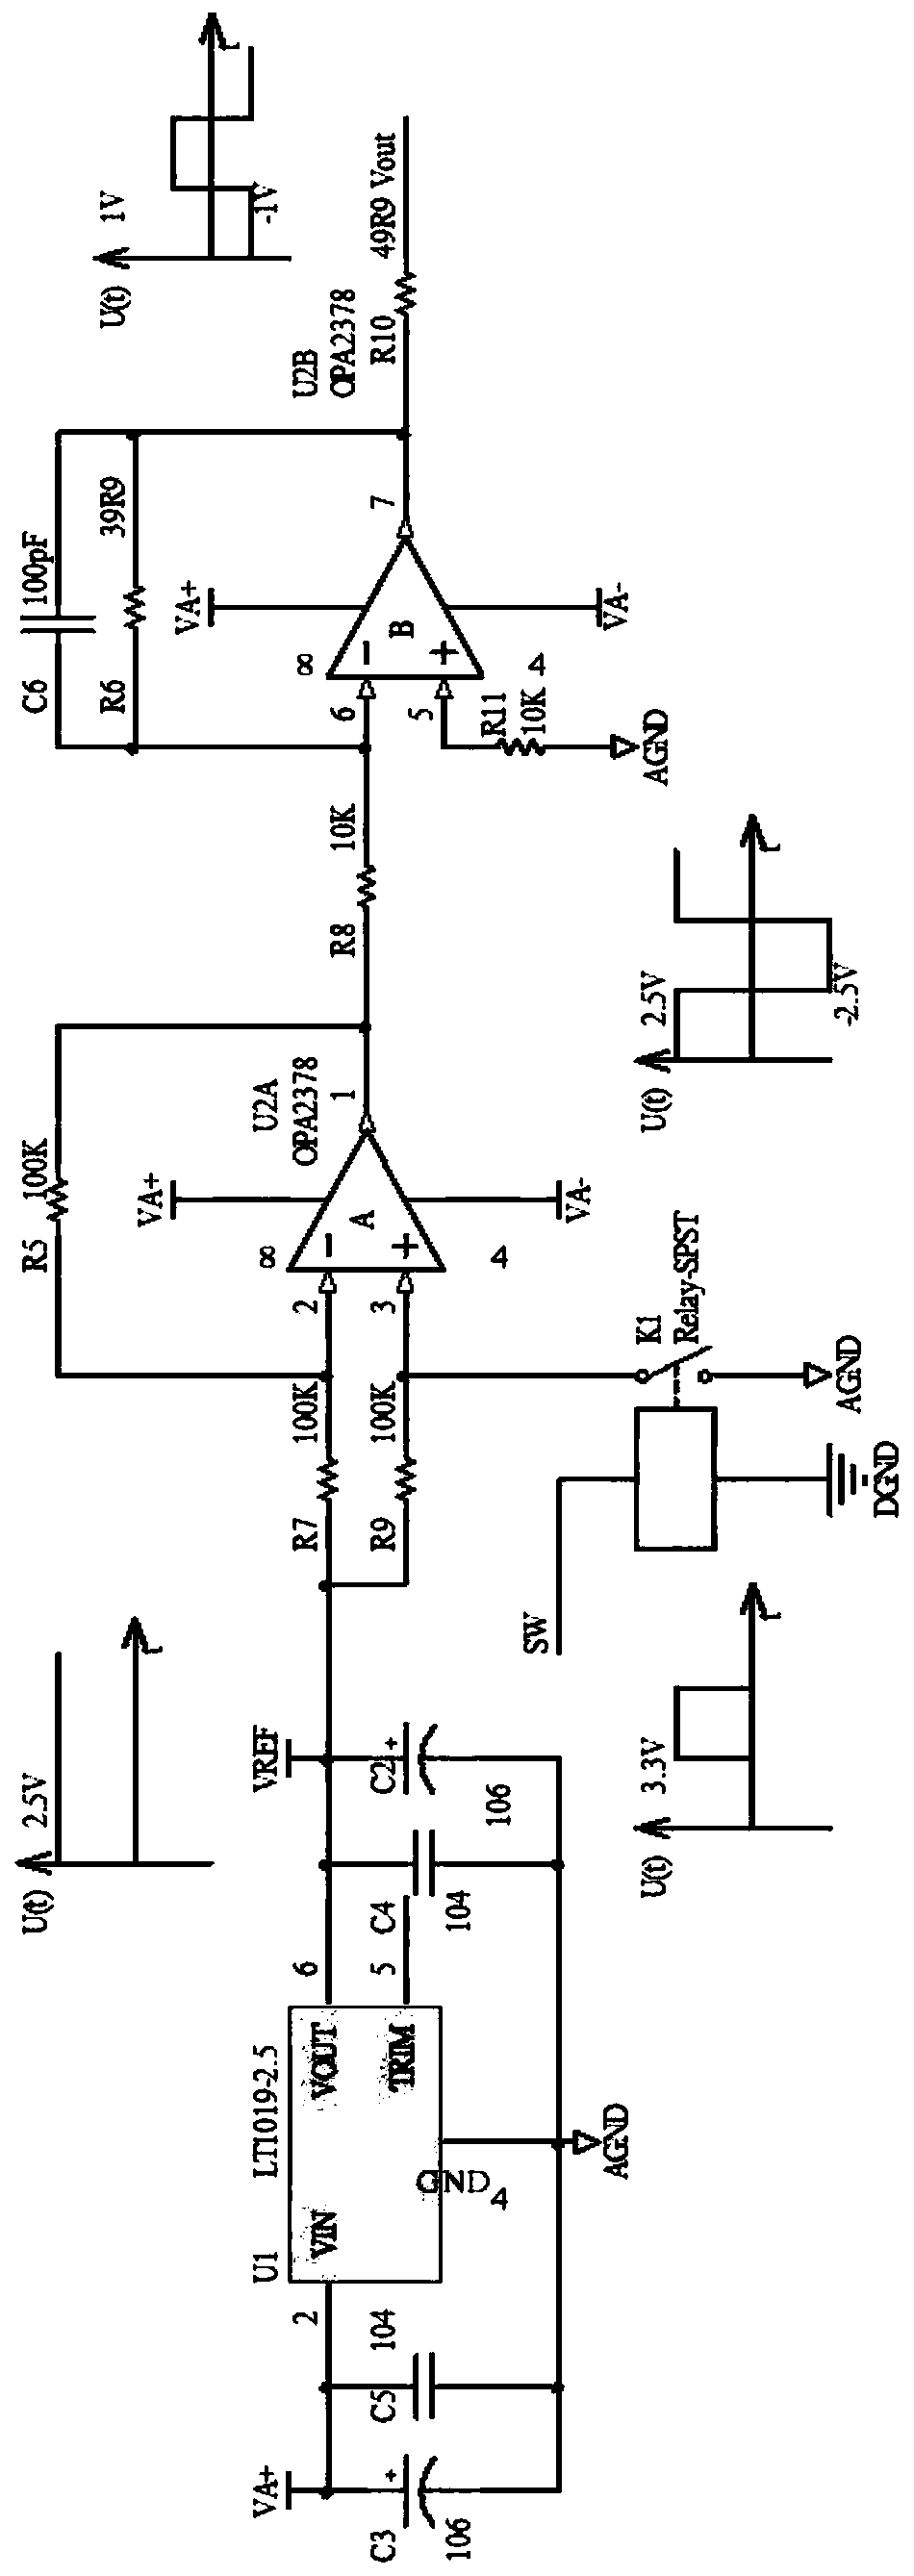 A Signal Simulator for Multifunctional Electromagnetic Method Receiver Test